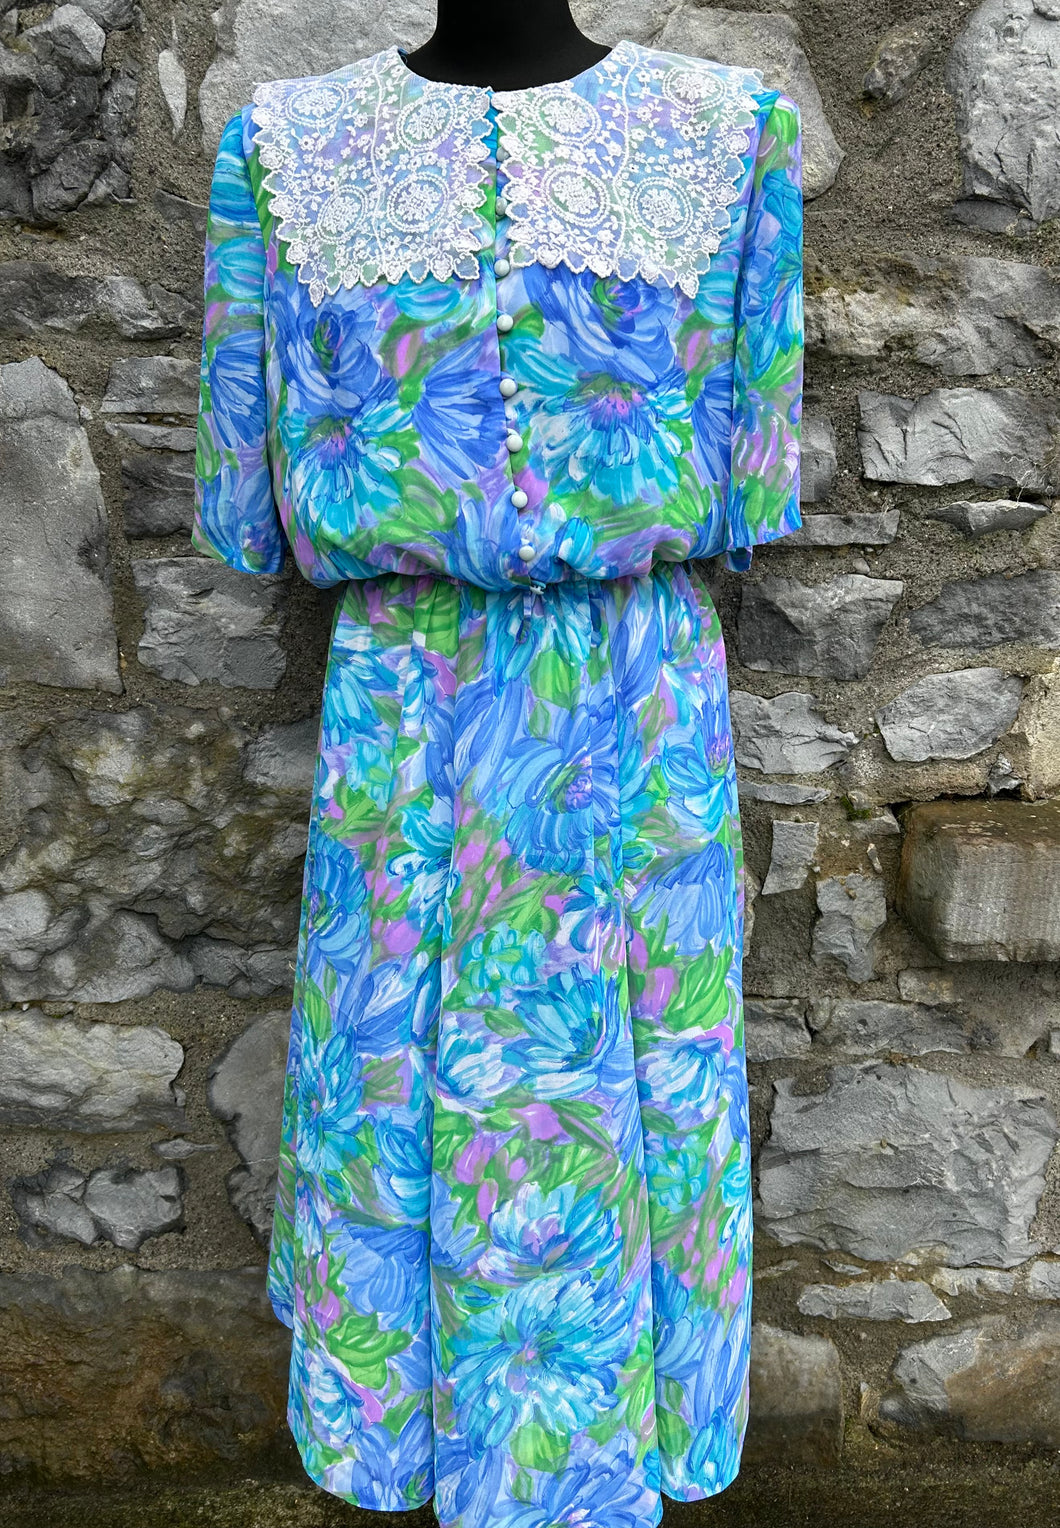 80s blue floral dress with lace collar uk 12